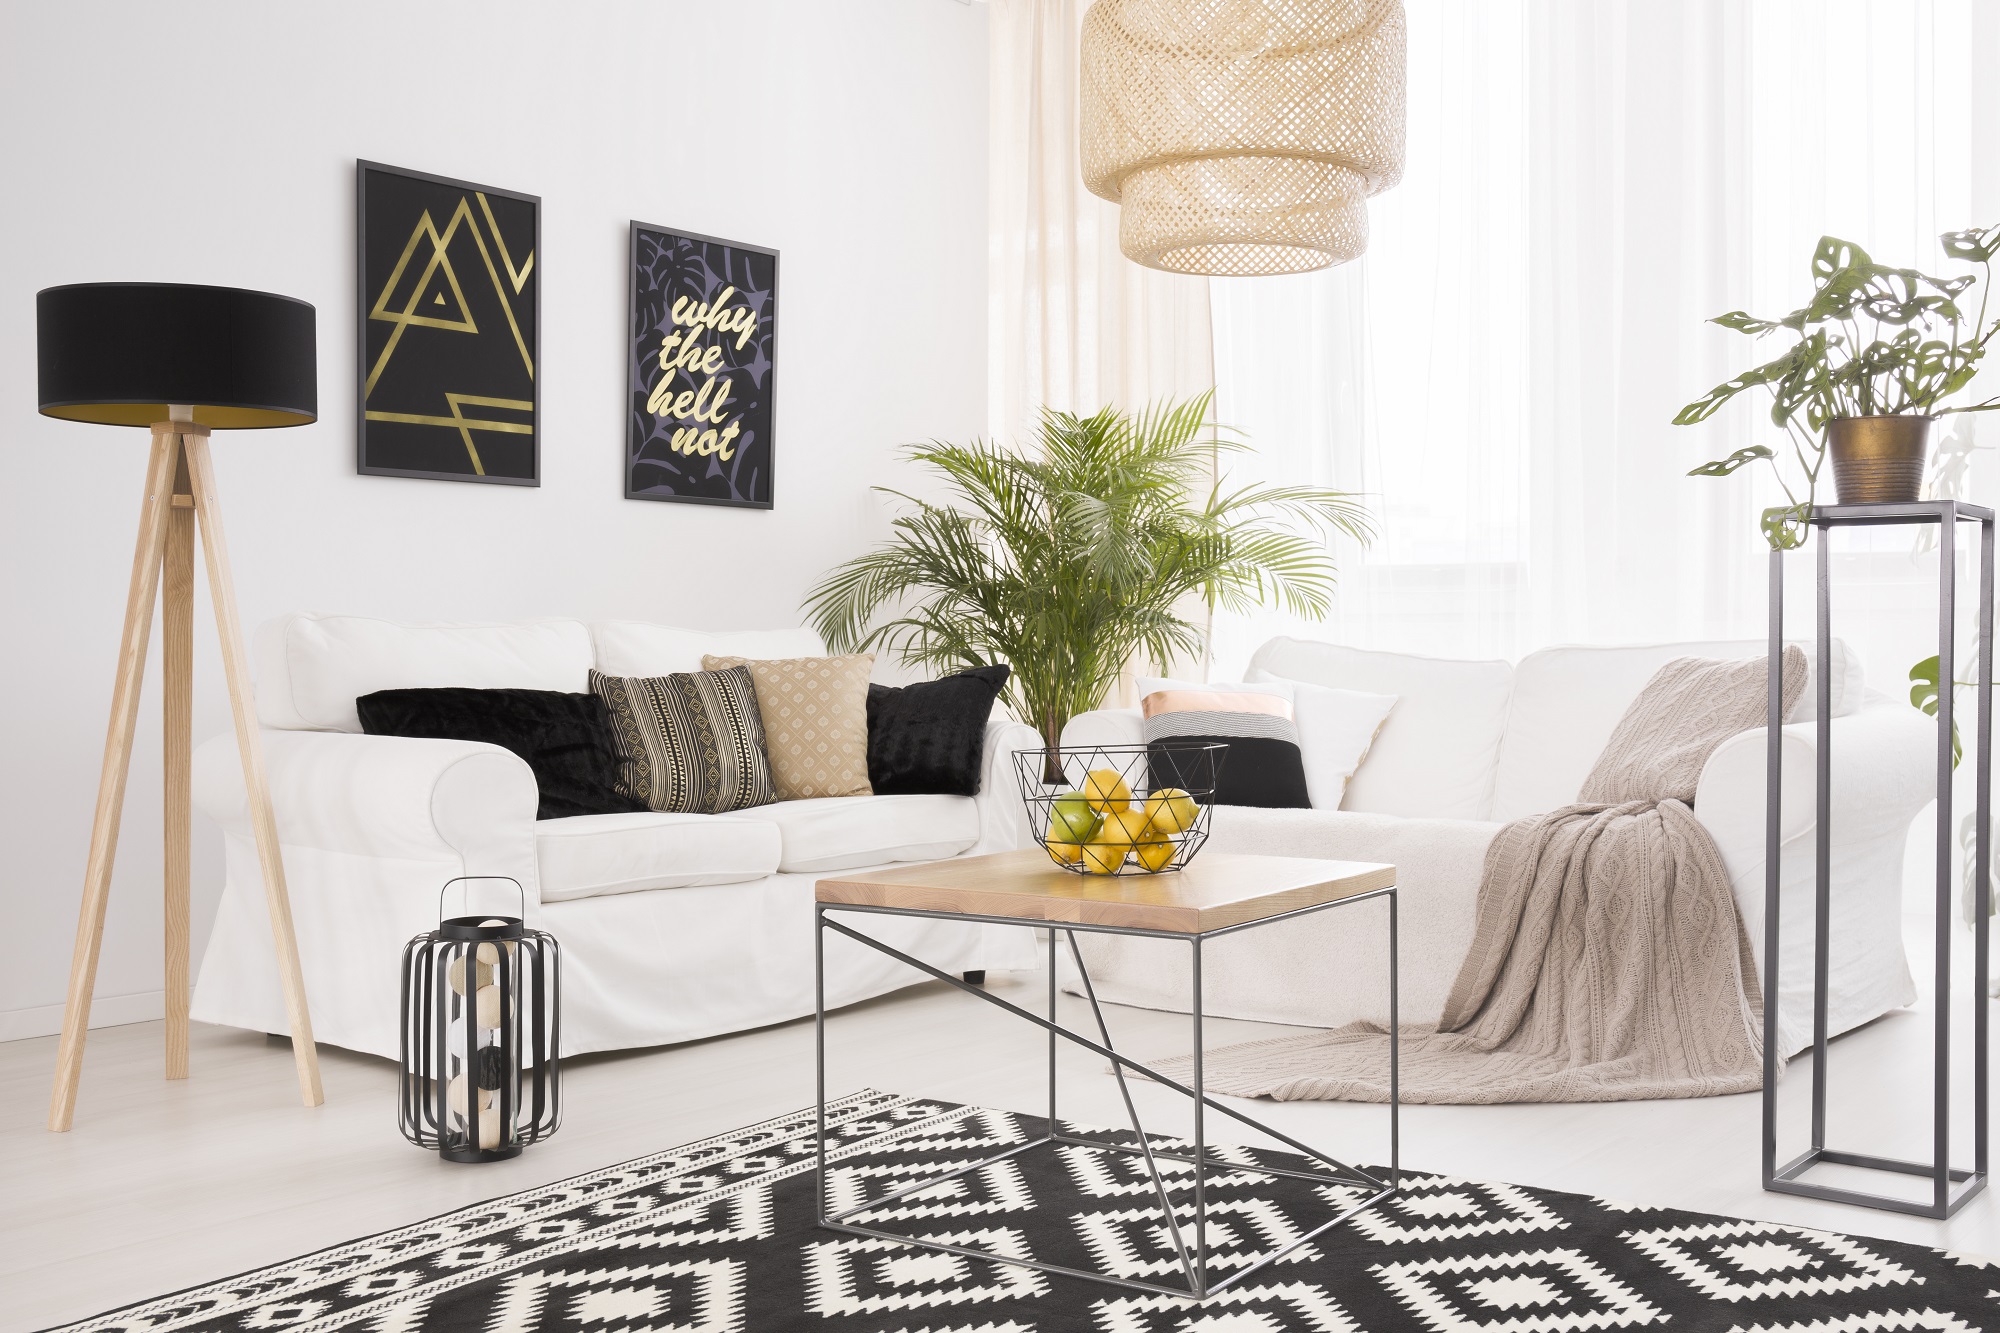 White modern living room with black decorations and patterned carpet